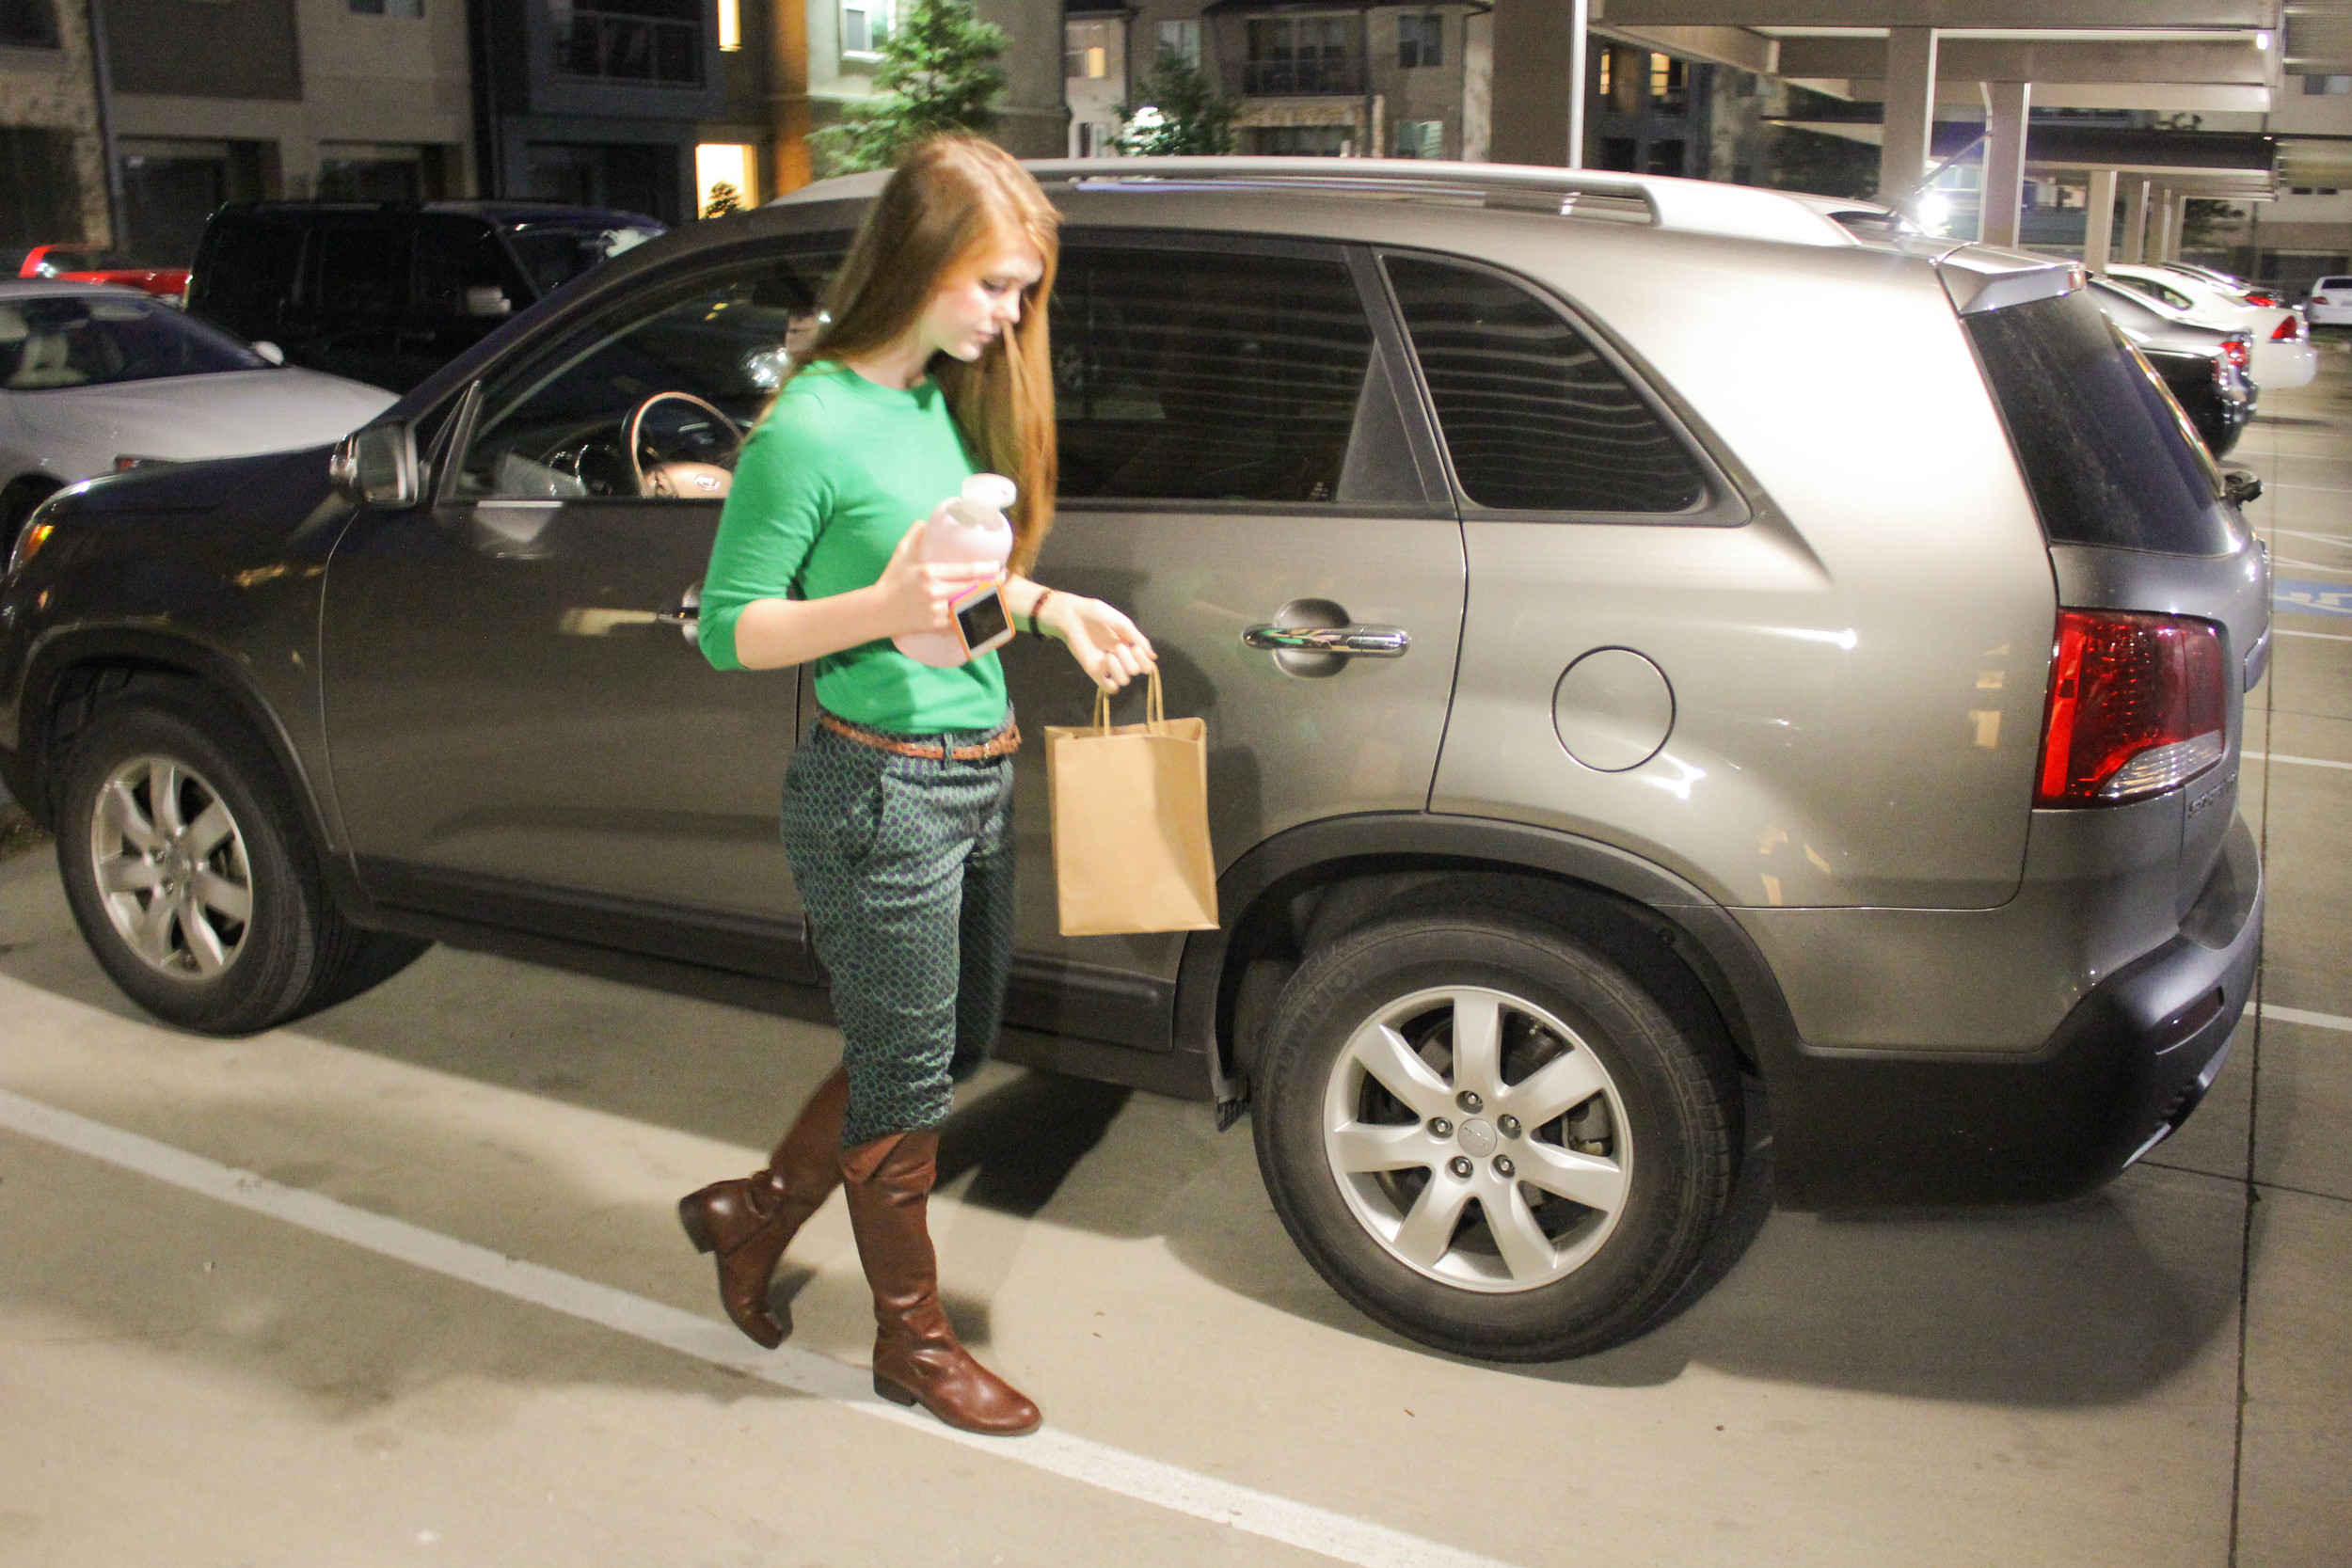 j crew pants, j crew sweater, vince camuto boots, loopy case